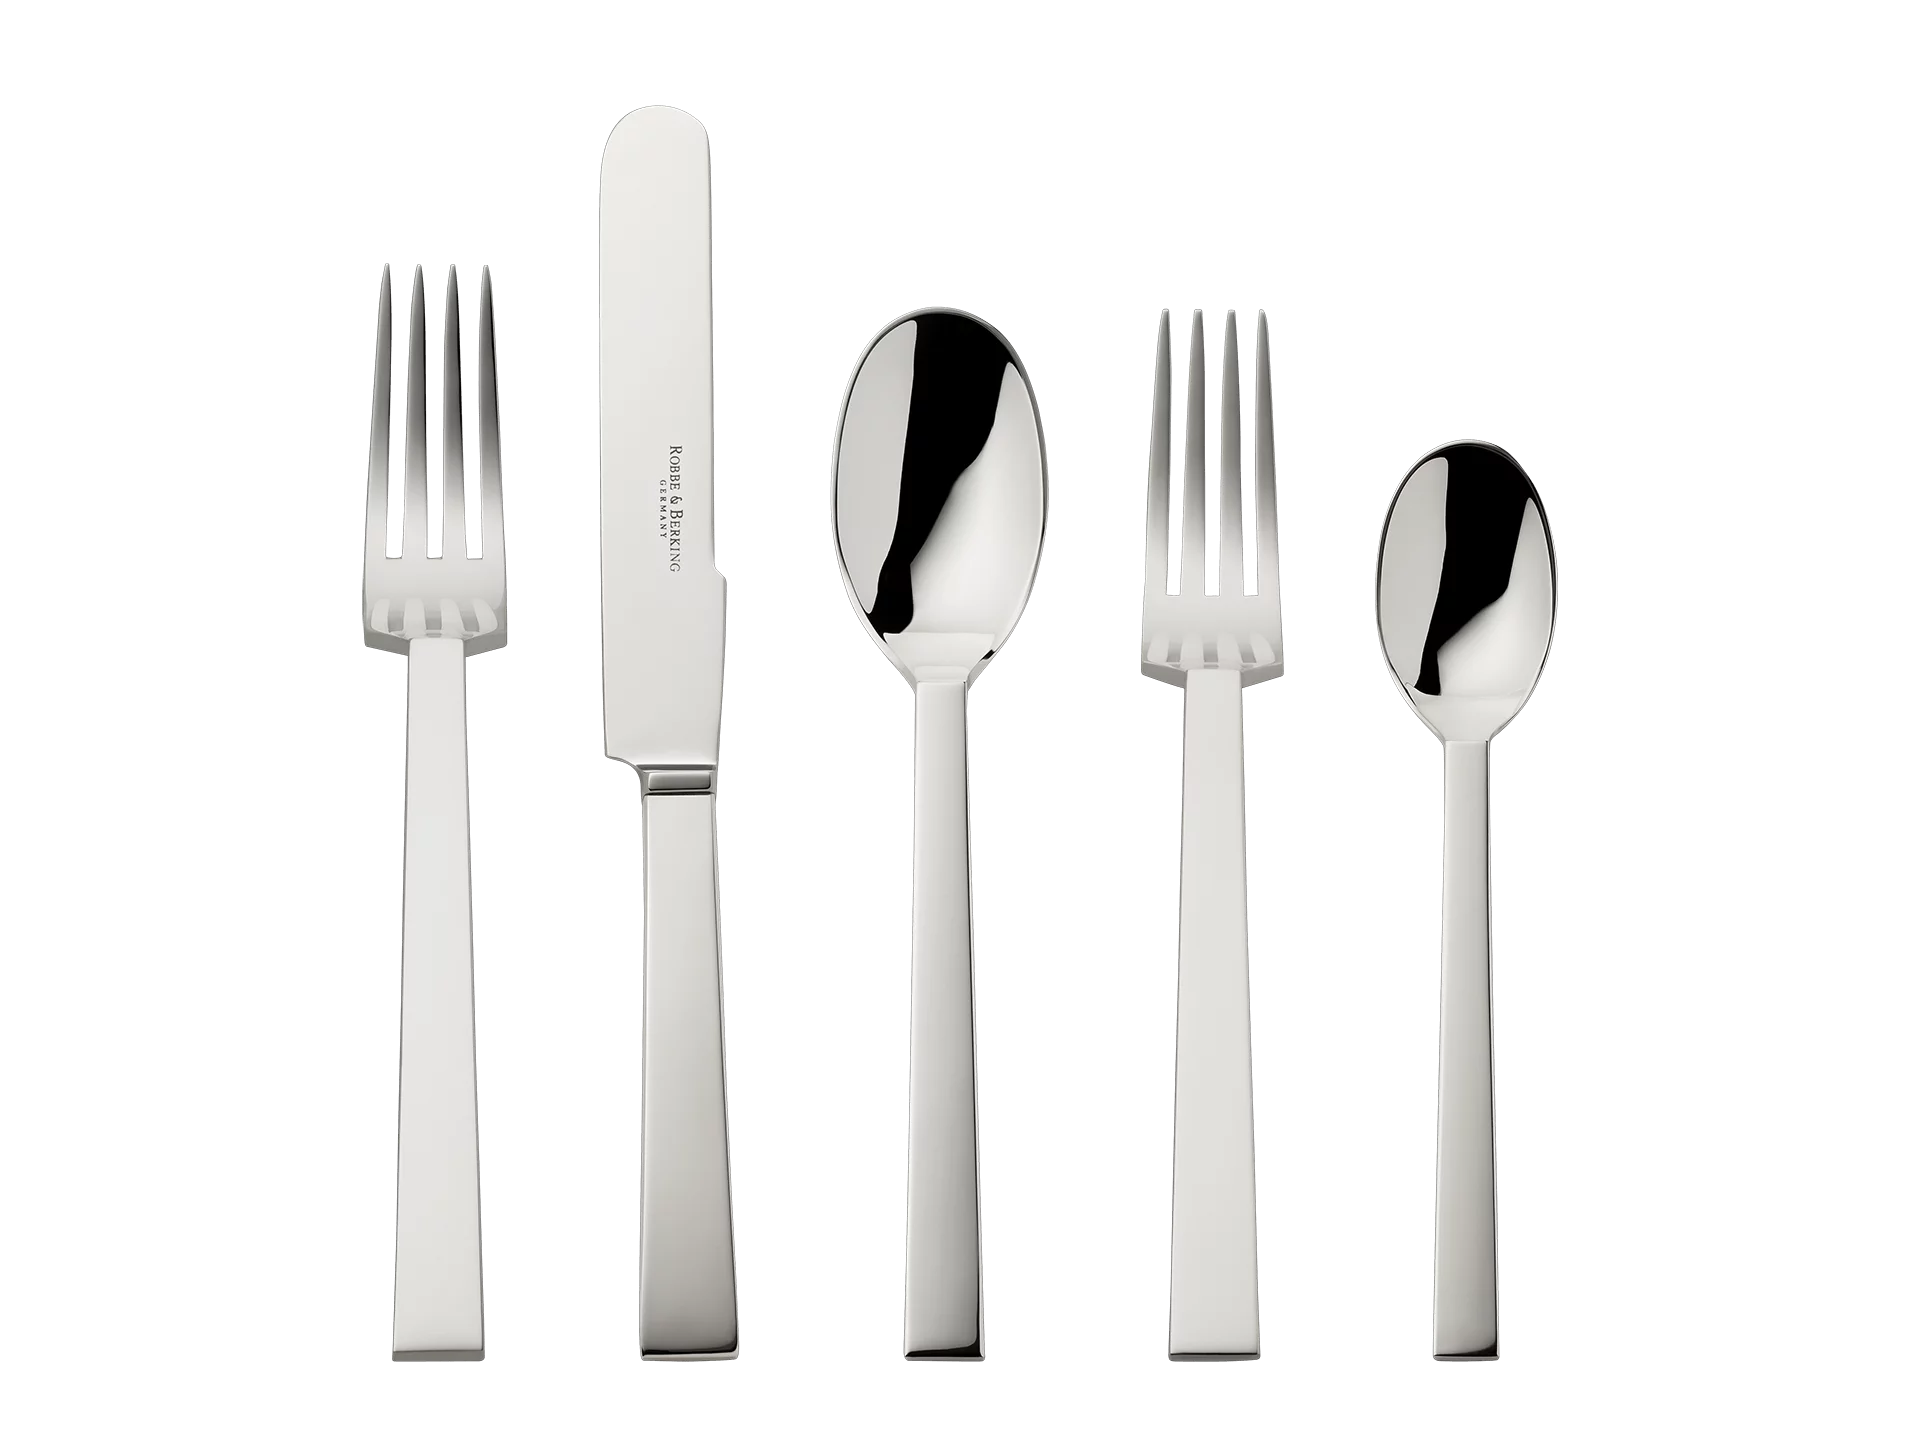 Sphinx 5-piece place setting (150g massive silverplated)